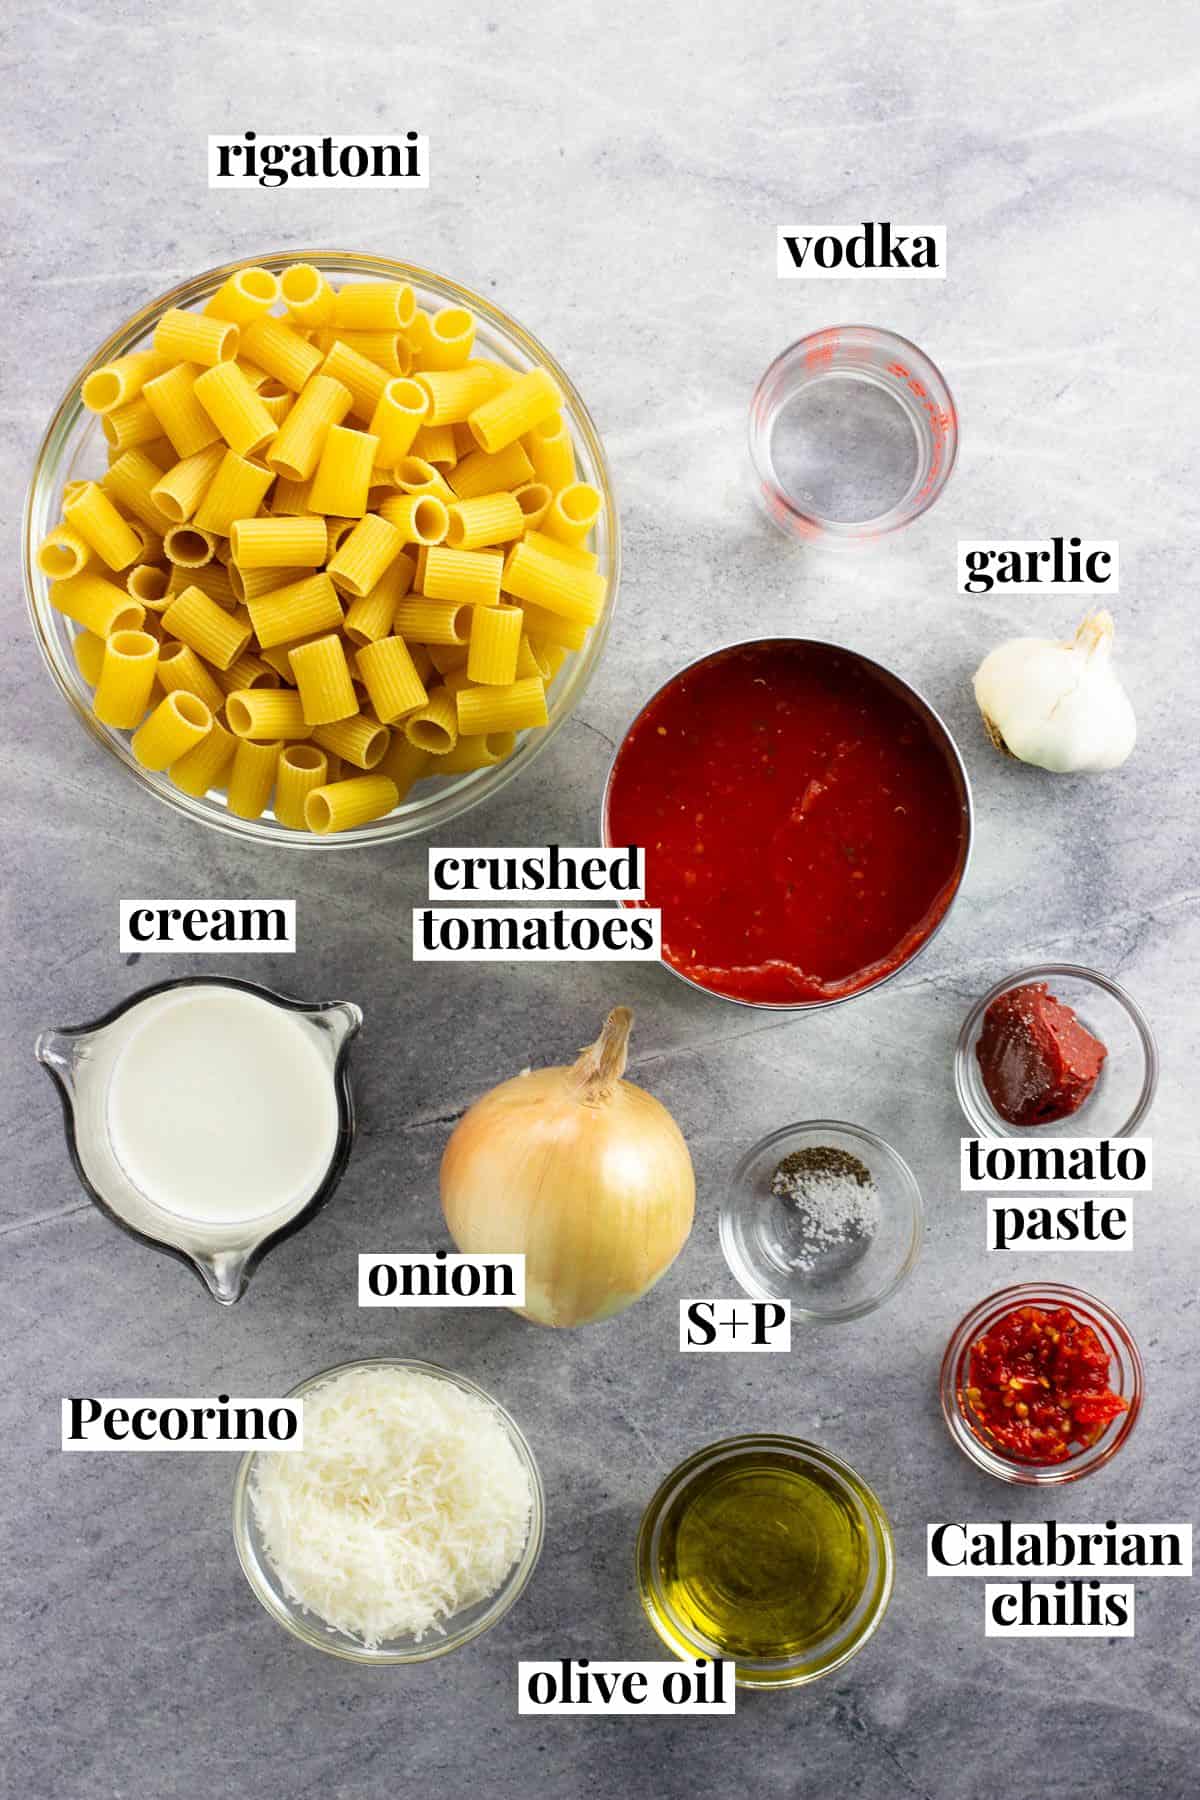 Labeled spicy rigatoni ingredients in separate bowls.